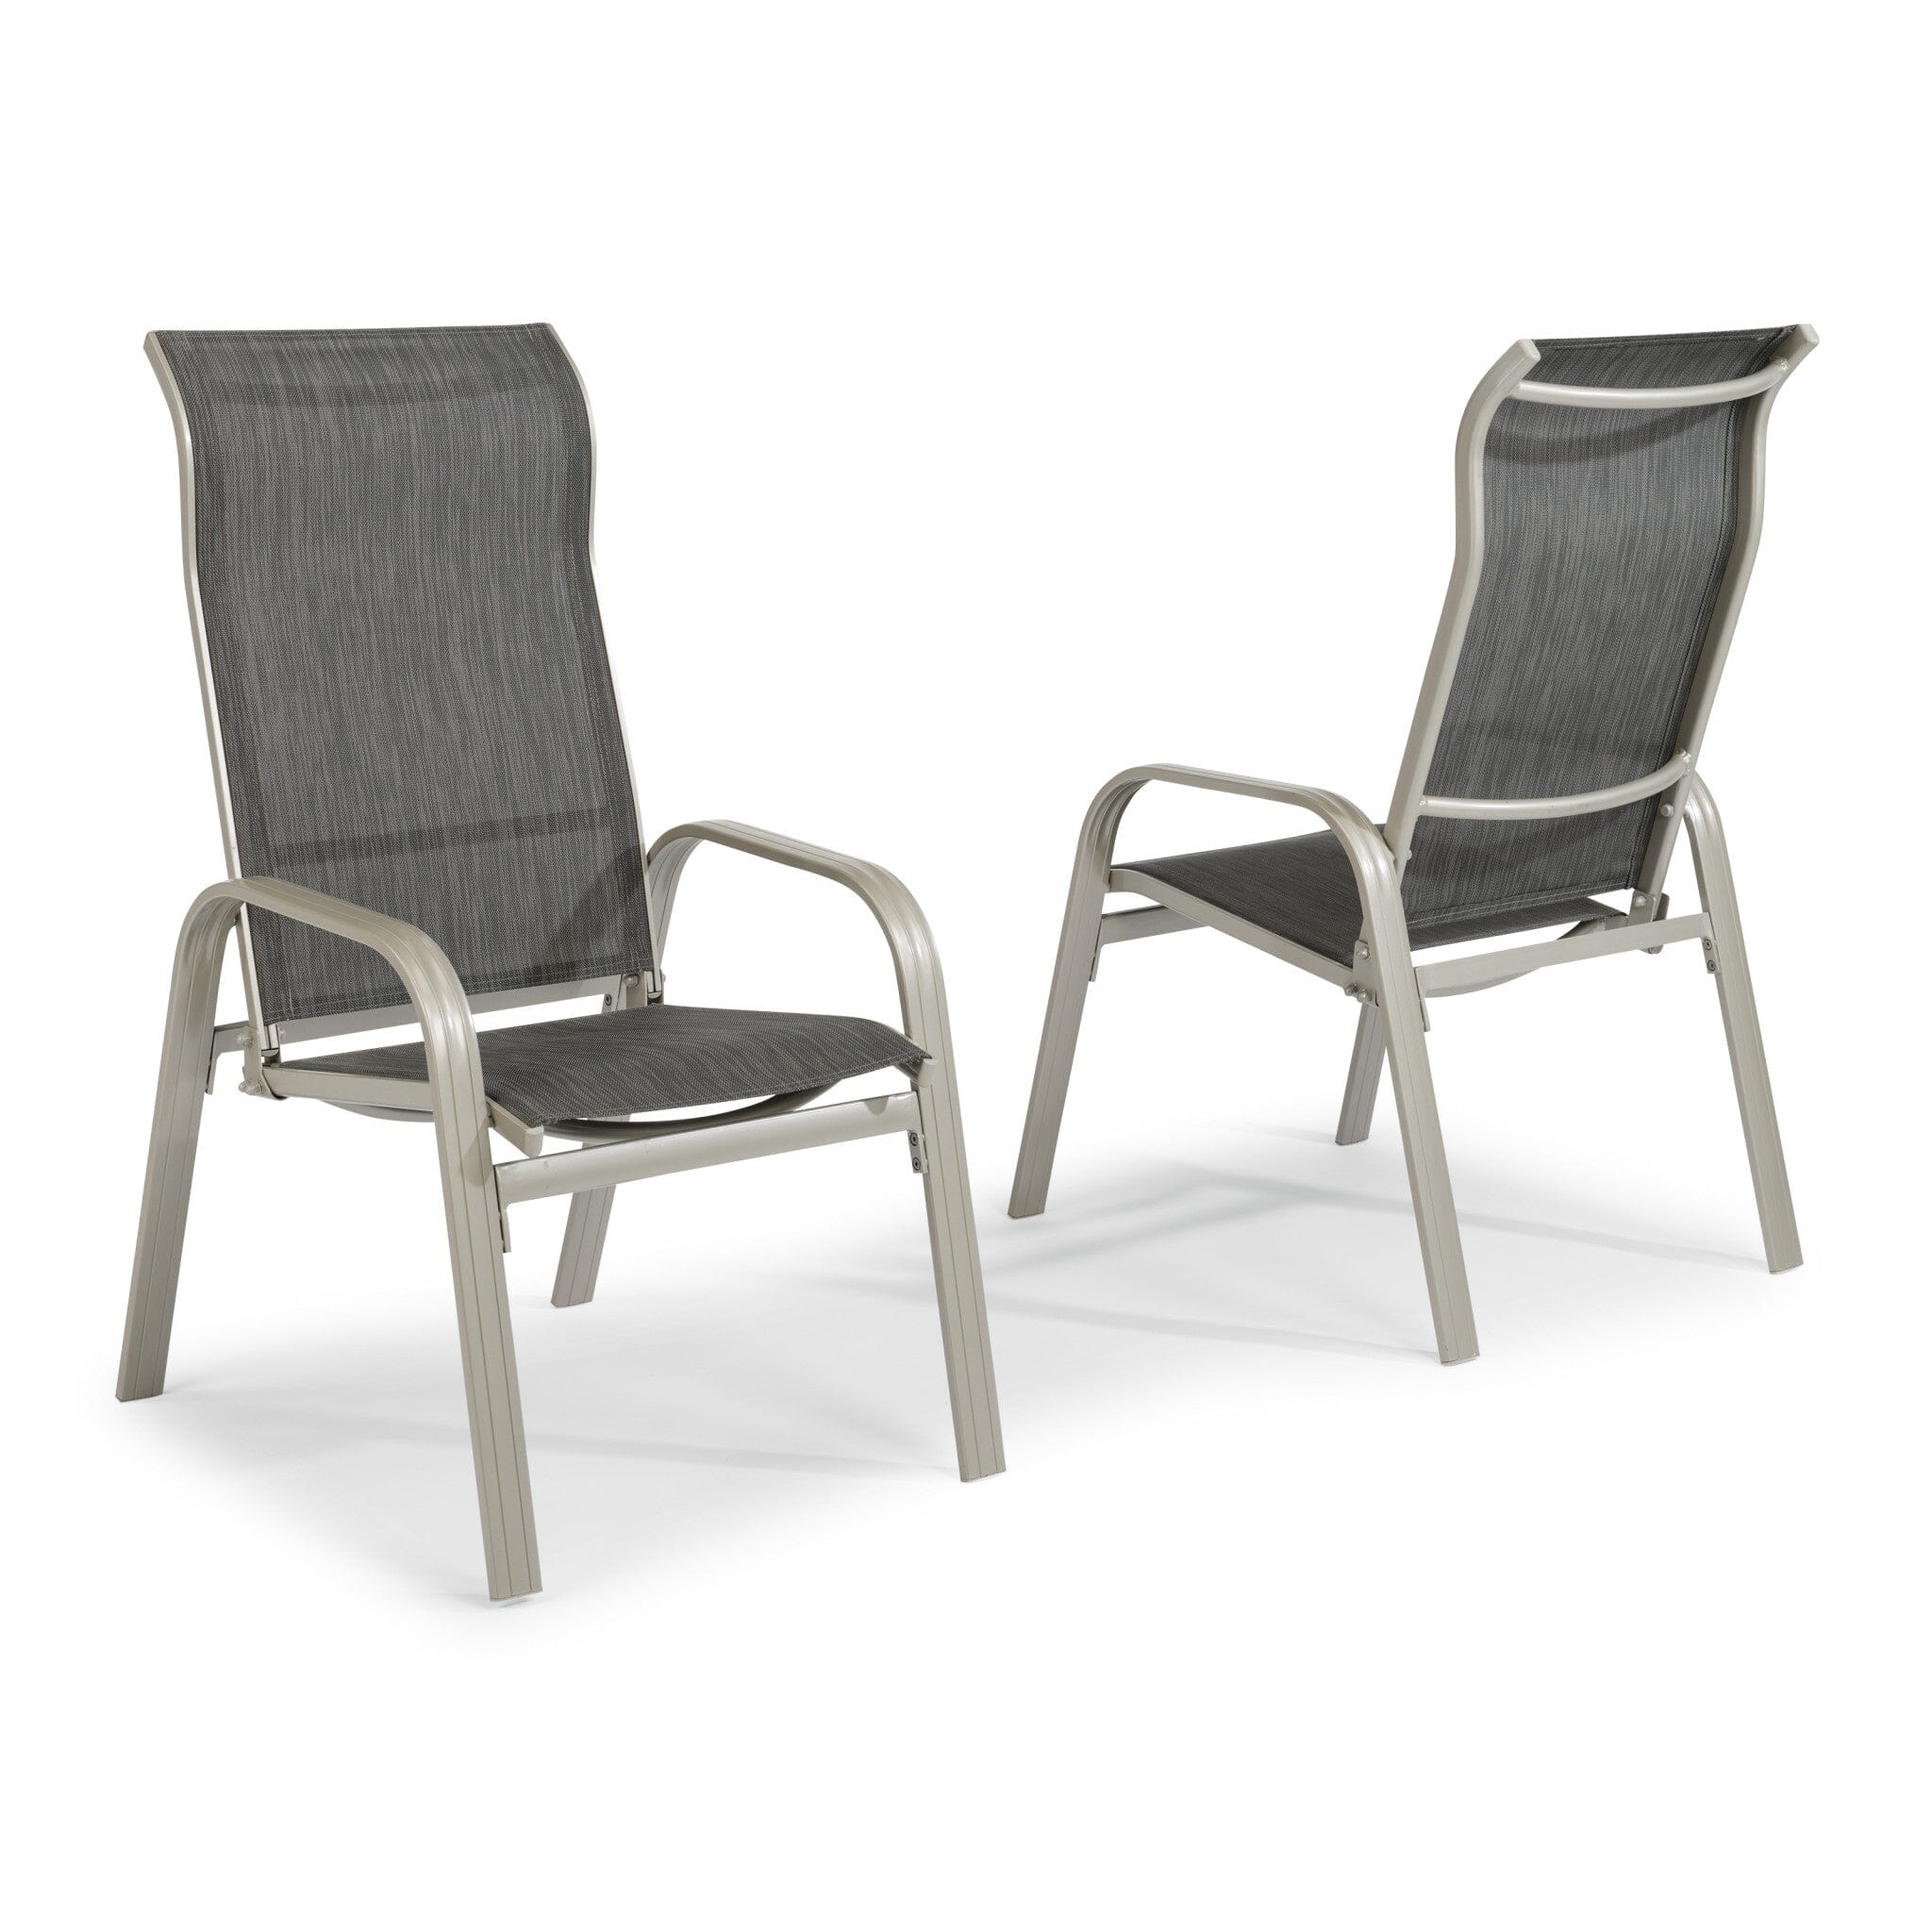 Modern & Contemporary Outdoor Chair Pair By Captiva Outdoor Seating Captiva